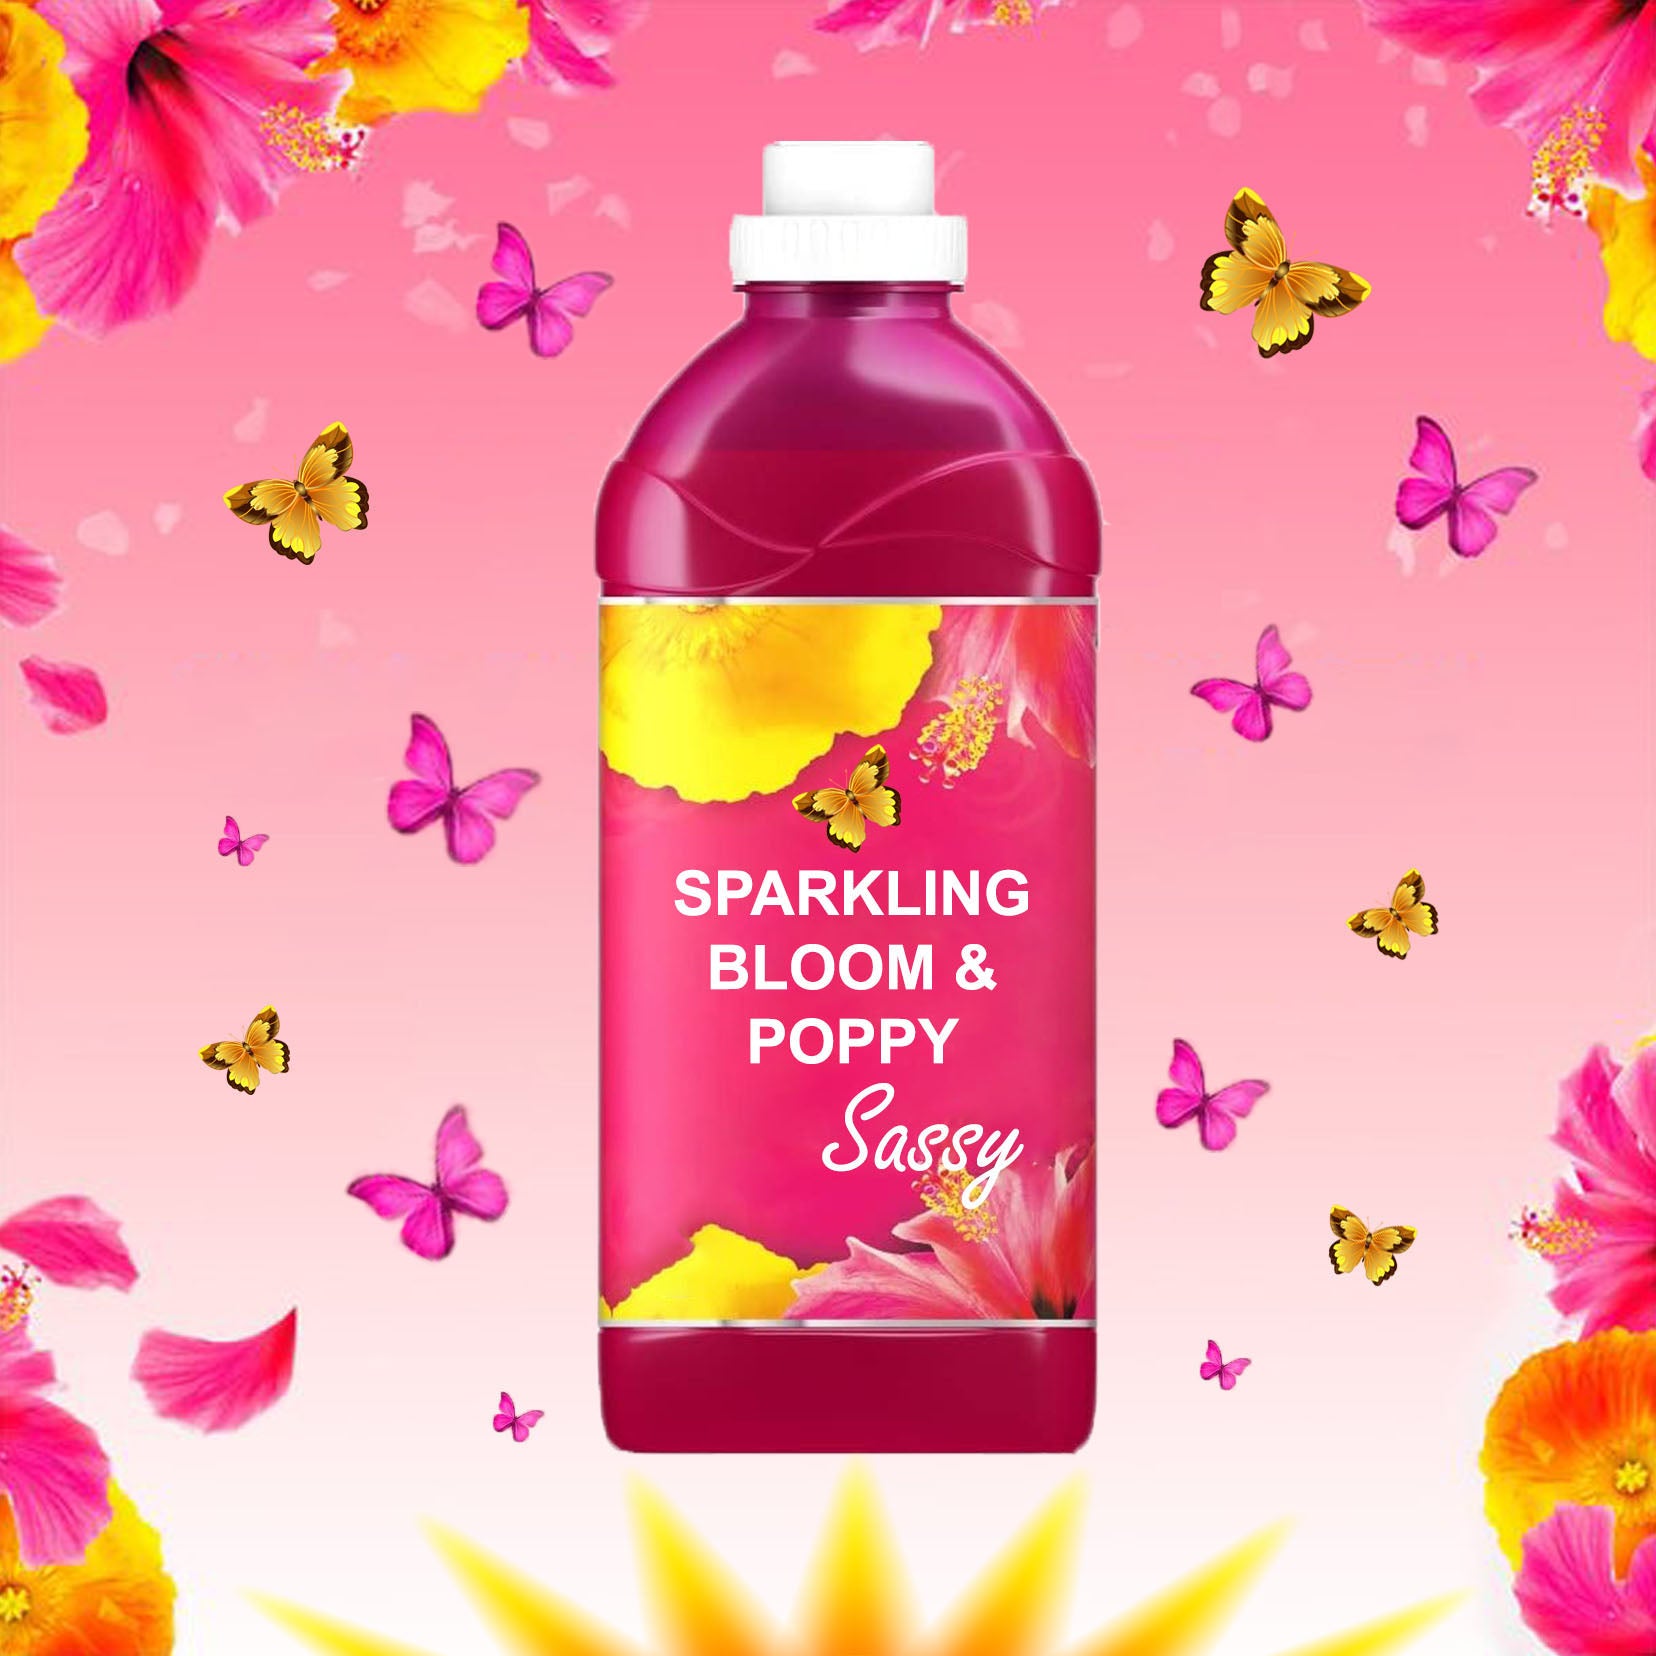 Sparkling Bloom & Poppy Fragrance Oil | Truly Personal | Candles, Wax Melts, Soap, Bath Bombs